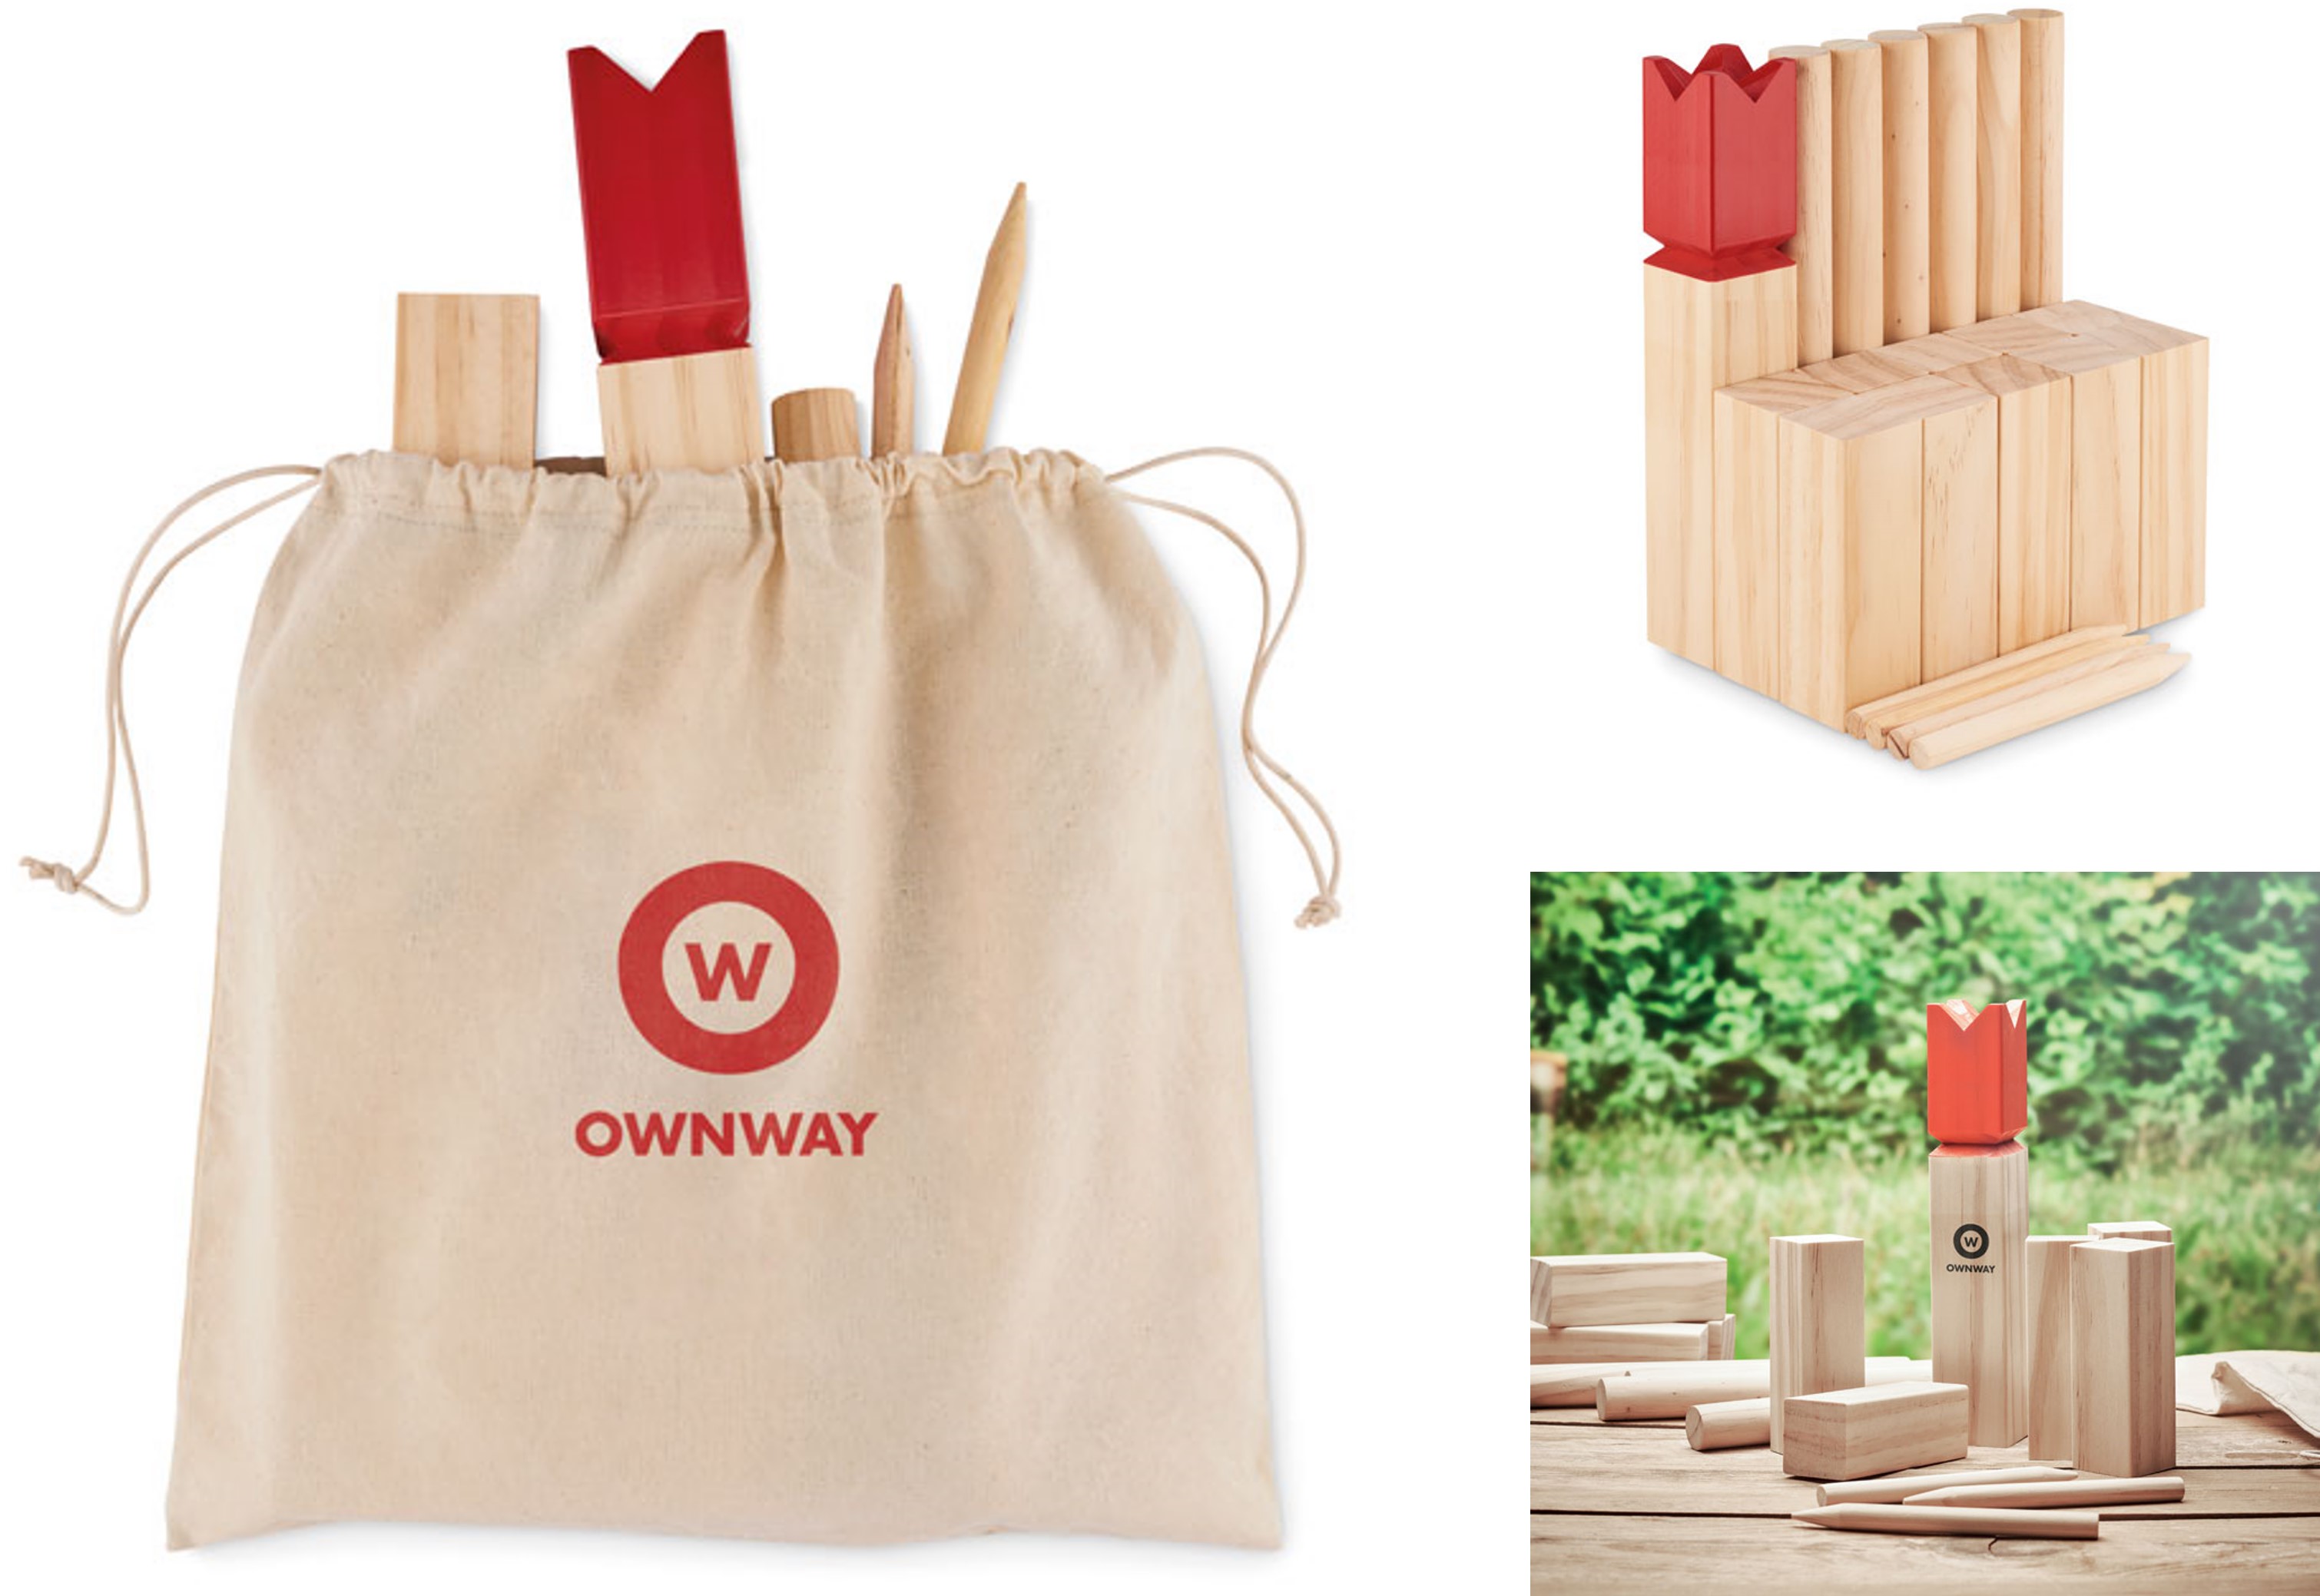 Branded Kubb Game